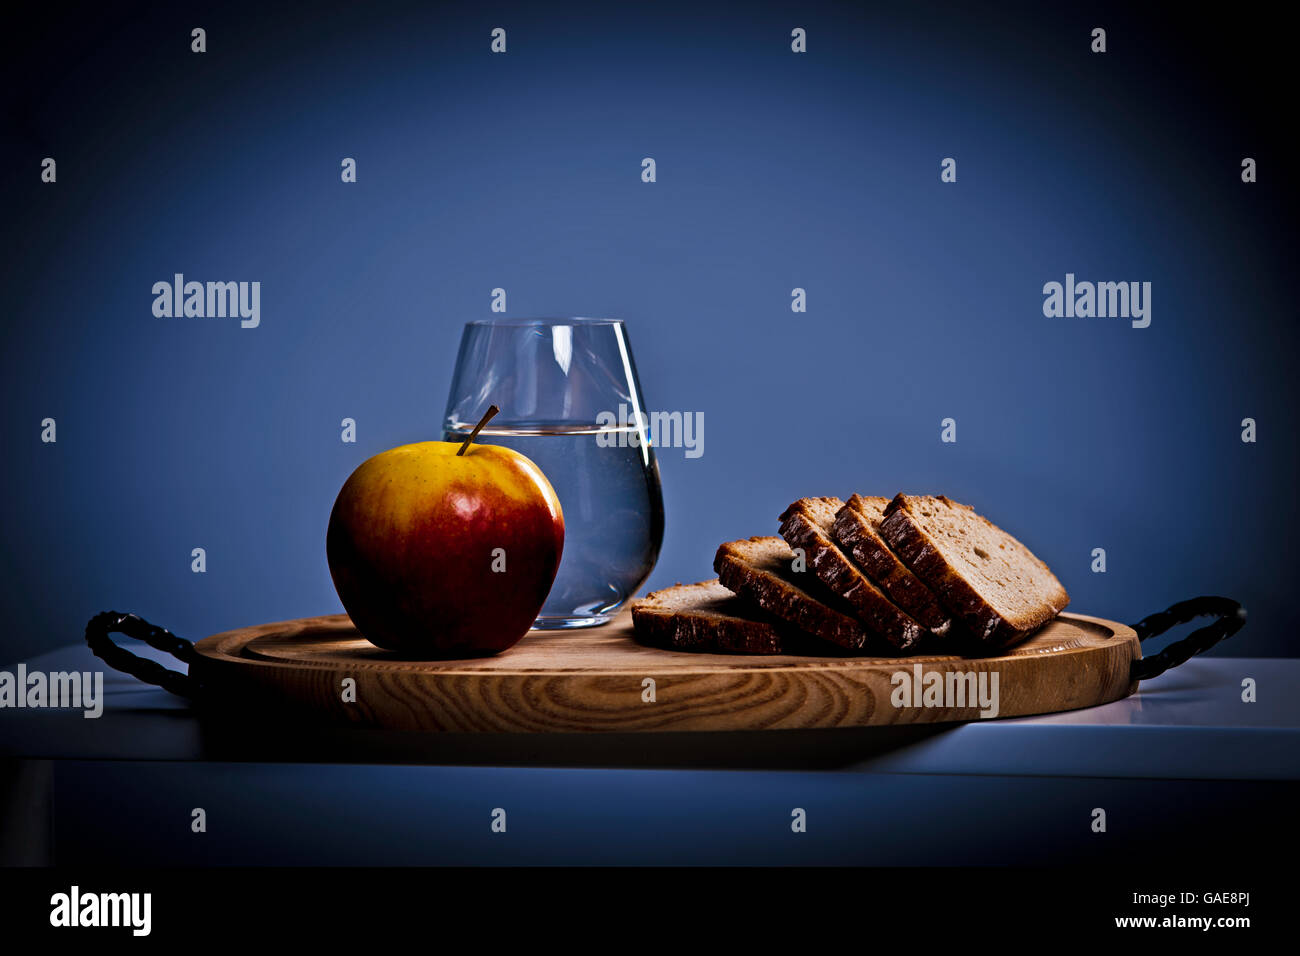 Glass of water, an apple and slices of bread Stock Photo